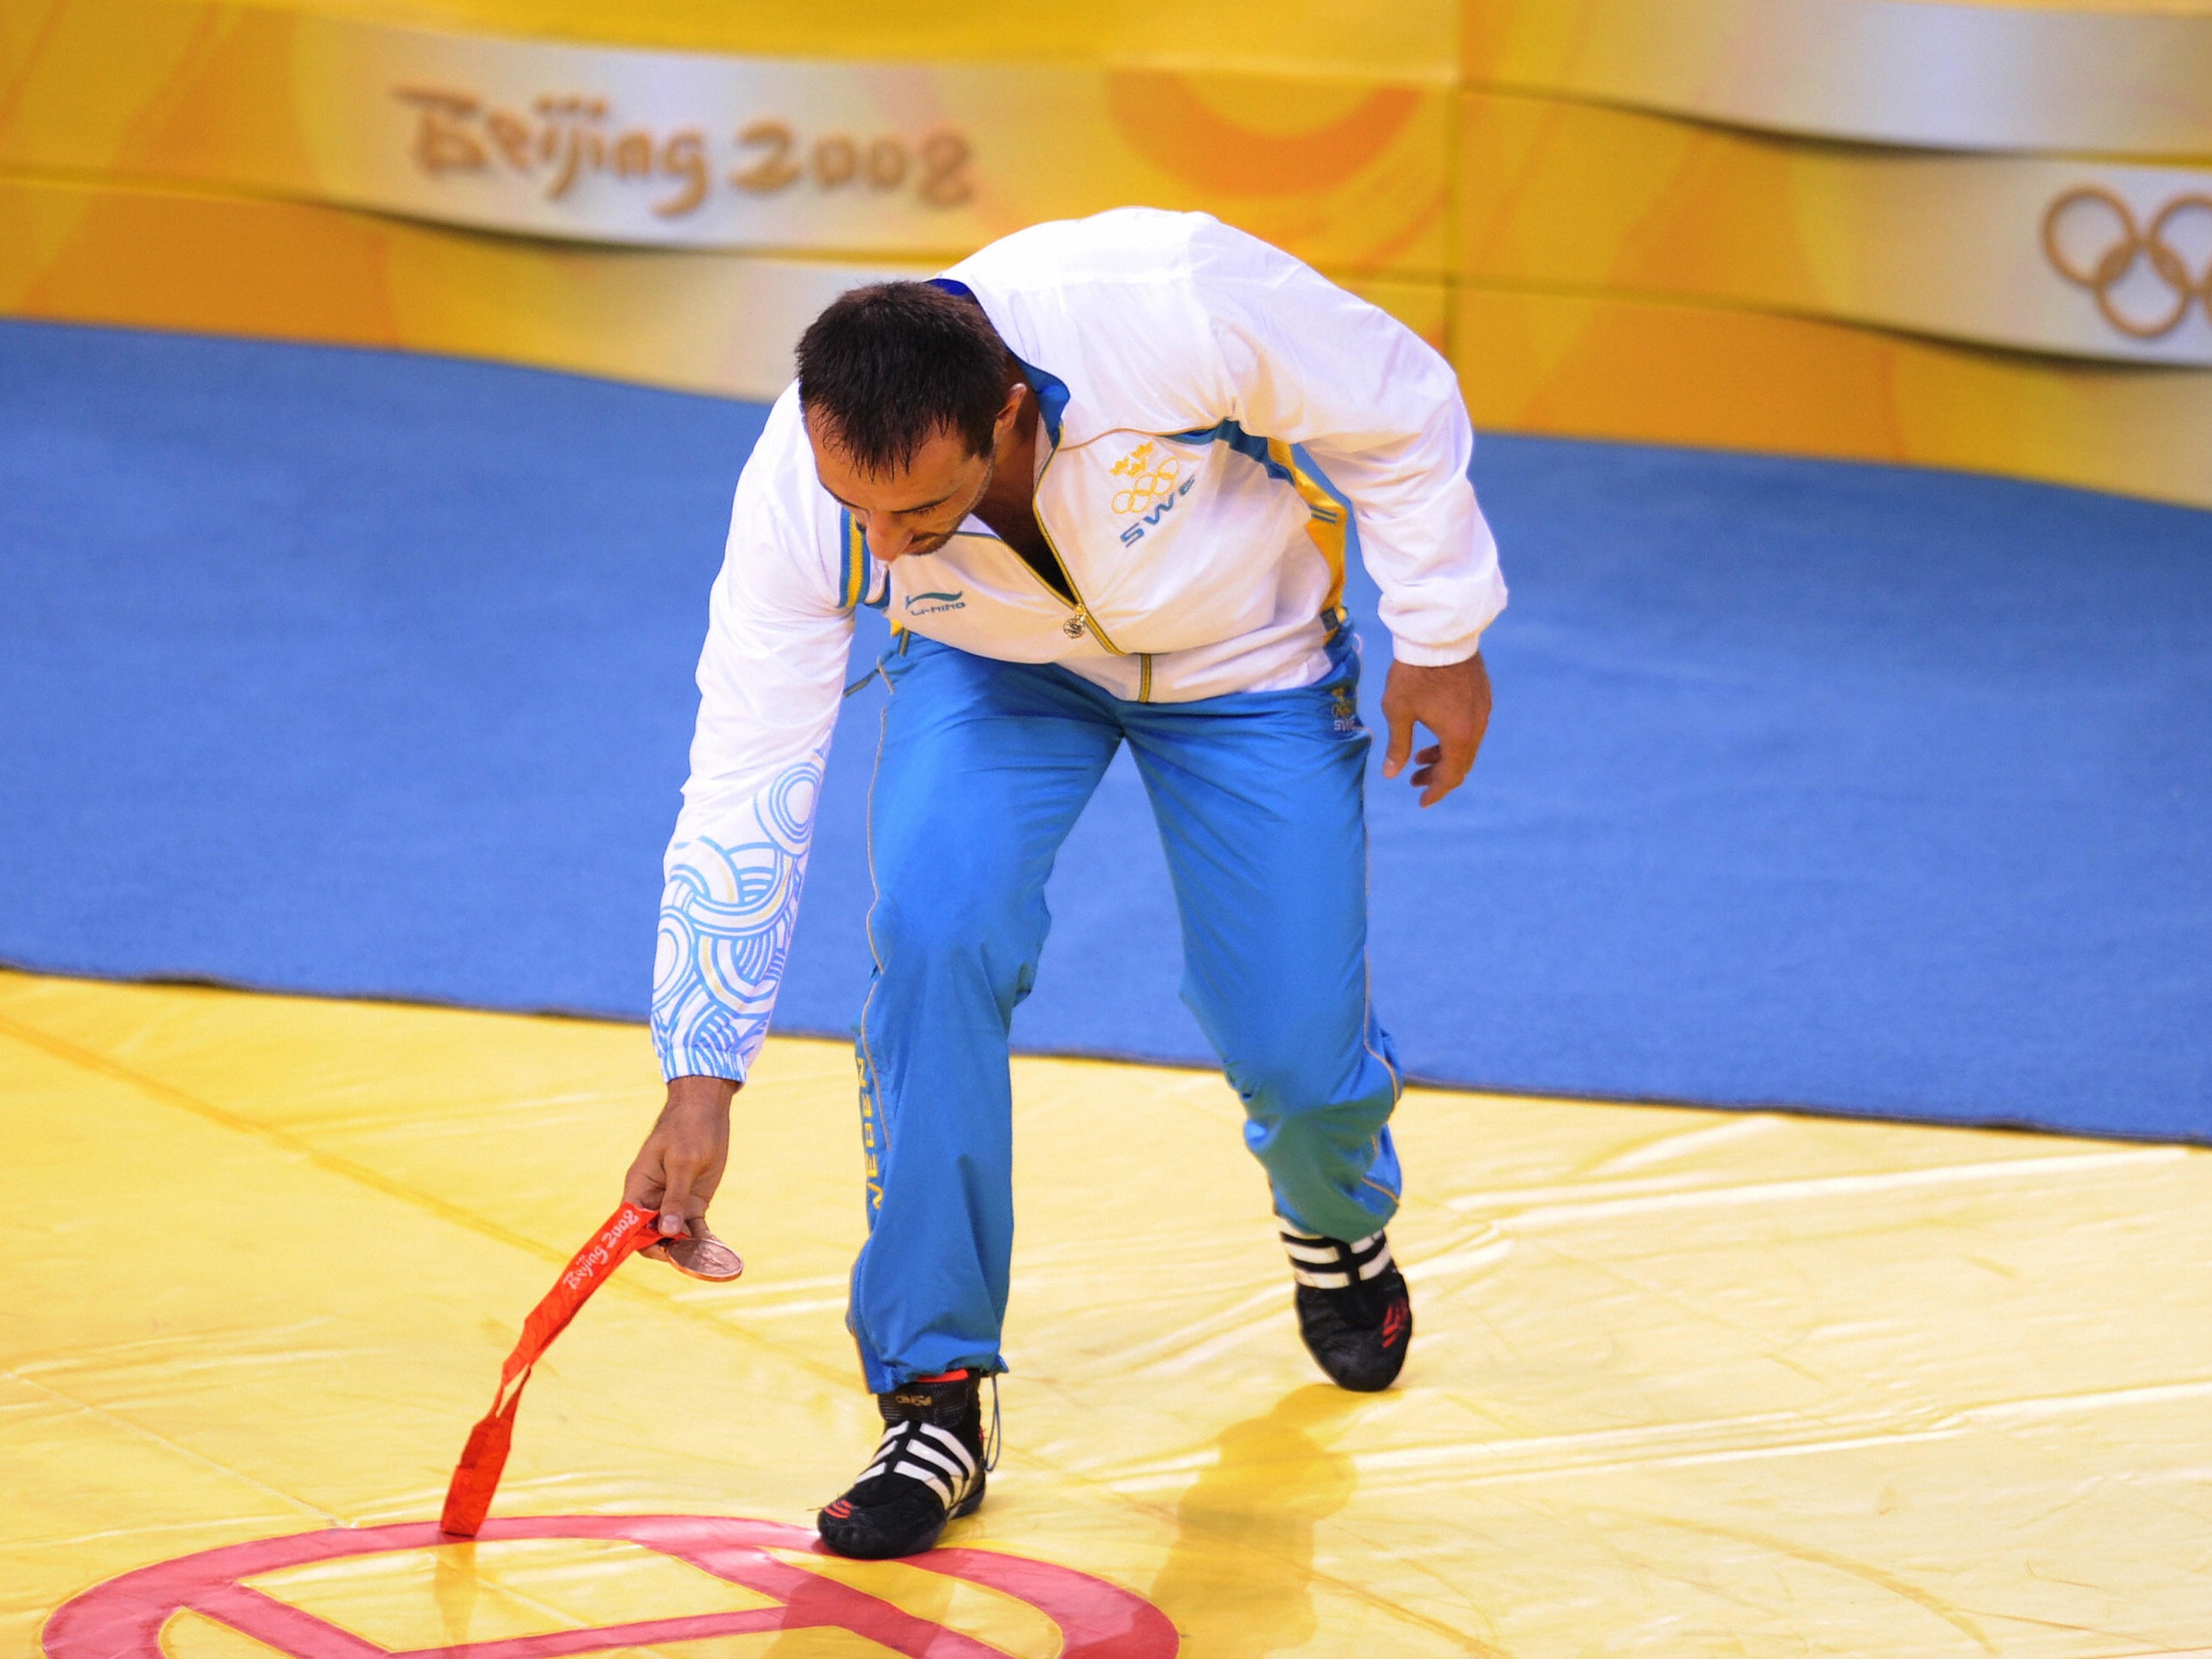 Greco-Roman wrestler Ara Abrahamian of Sweden places his bronze medal at the center of the competition mat in protest of the result in the men's Greco-Roman 84kg wrestling category during the 2008 Beijing Olympic Games